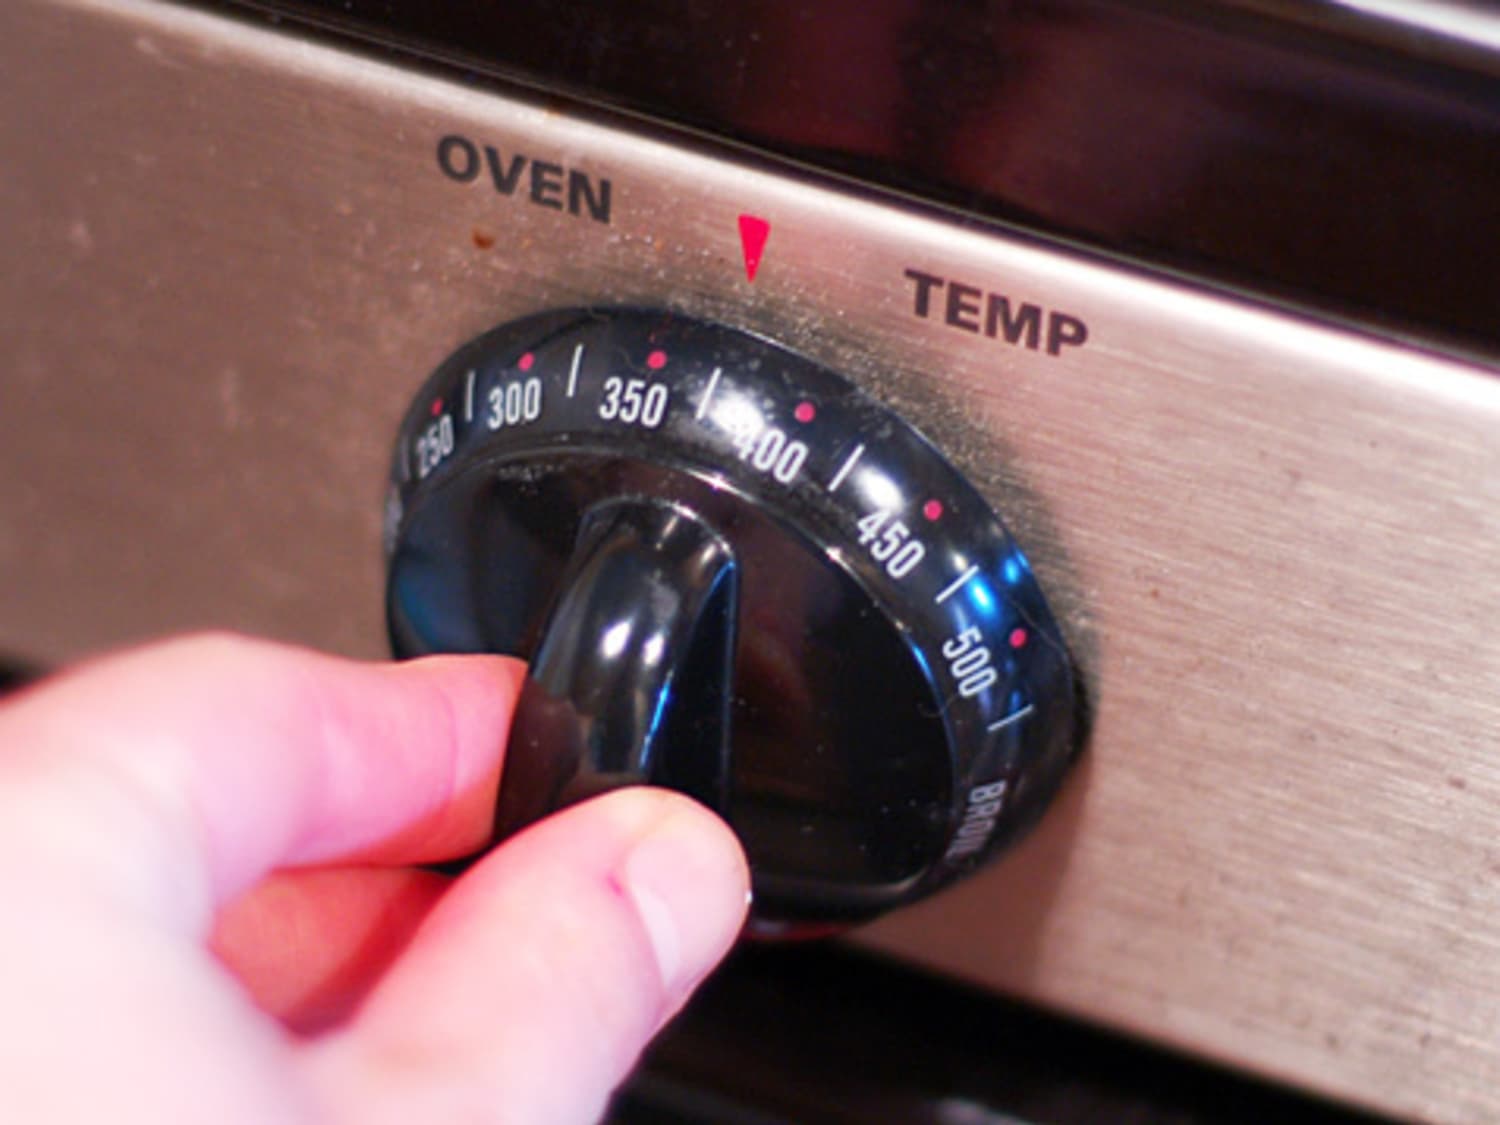 Bake at 350 degrees? Oven temperature is uncontrollable, and we should stop  trying to micromanage it.